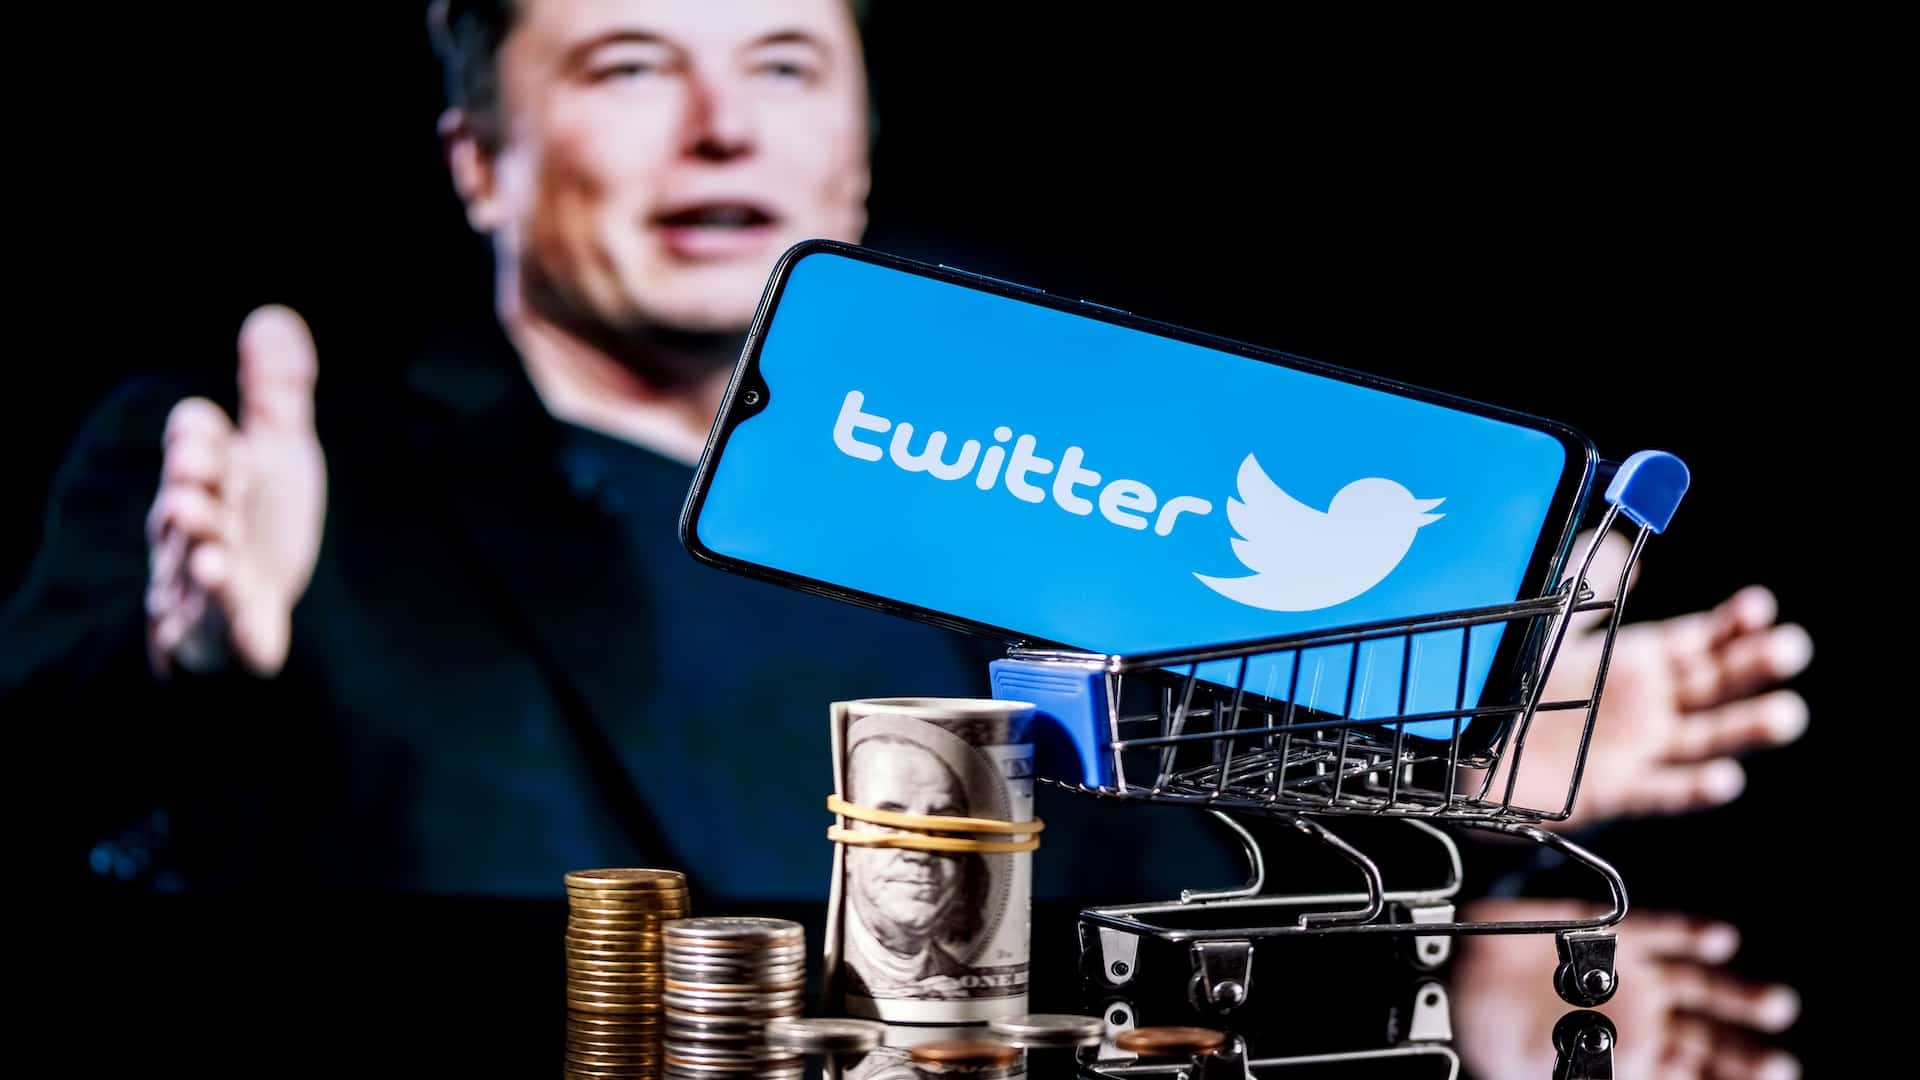 Twitter will start paying verified content creators in coming weeks, says Elon Musk